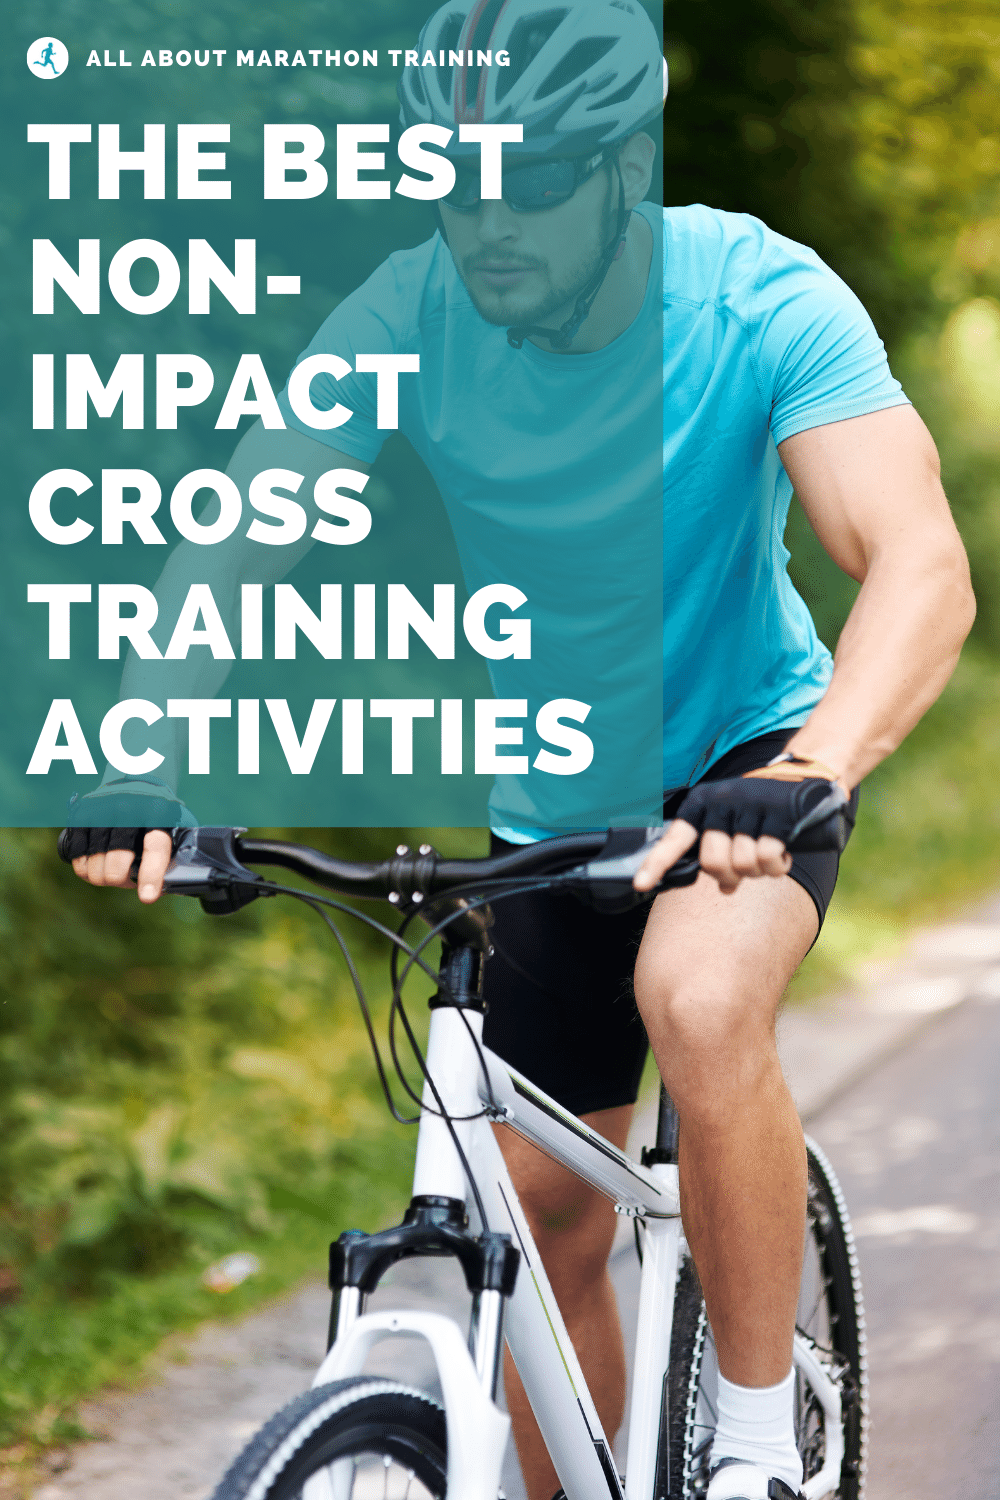 Cross Training for Runners - what to do & what to avoid